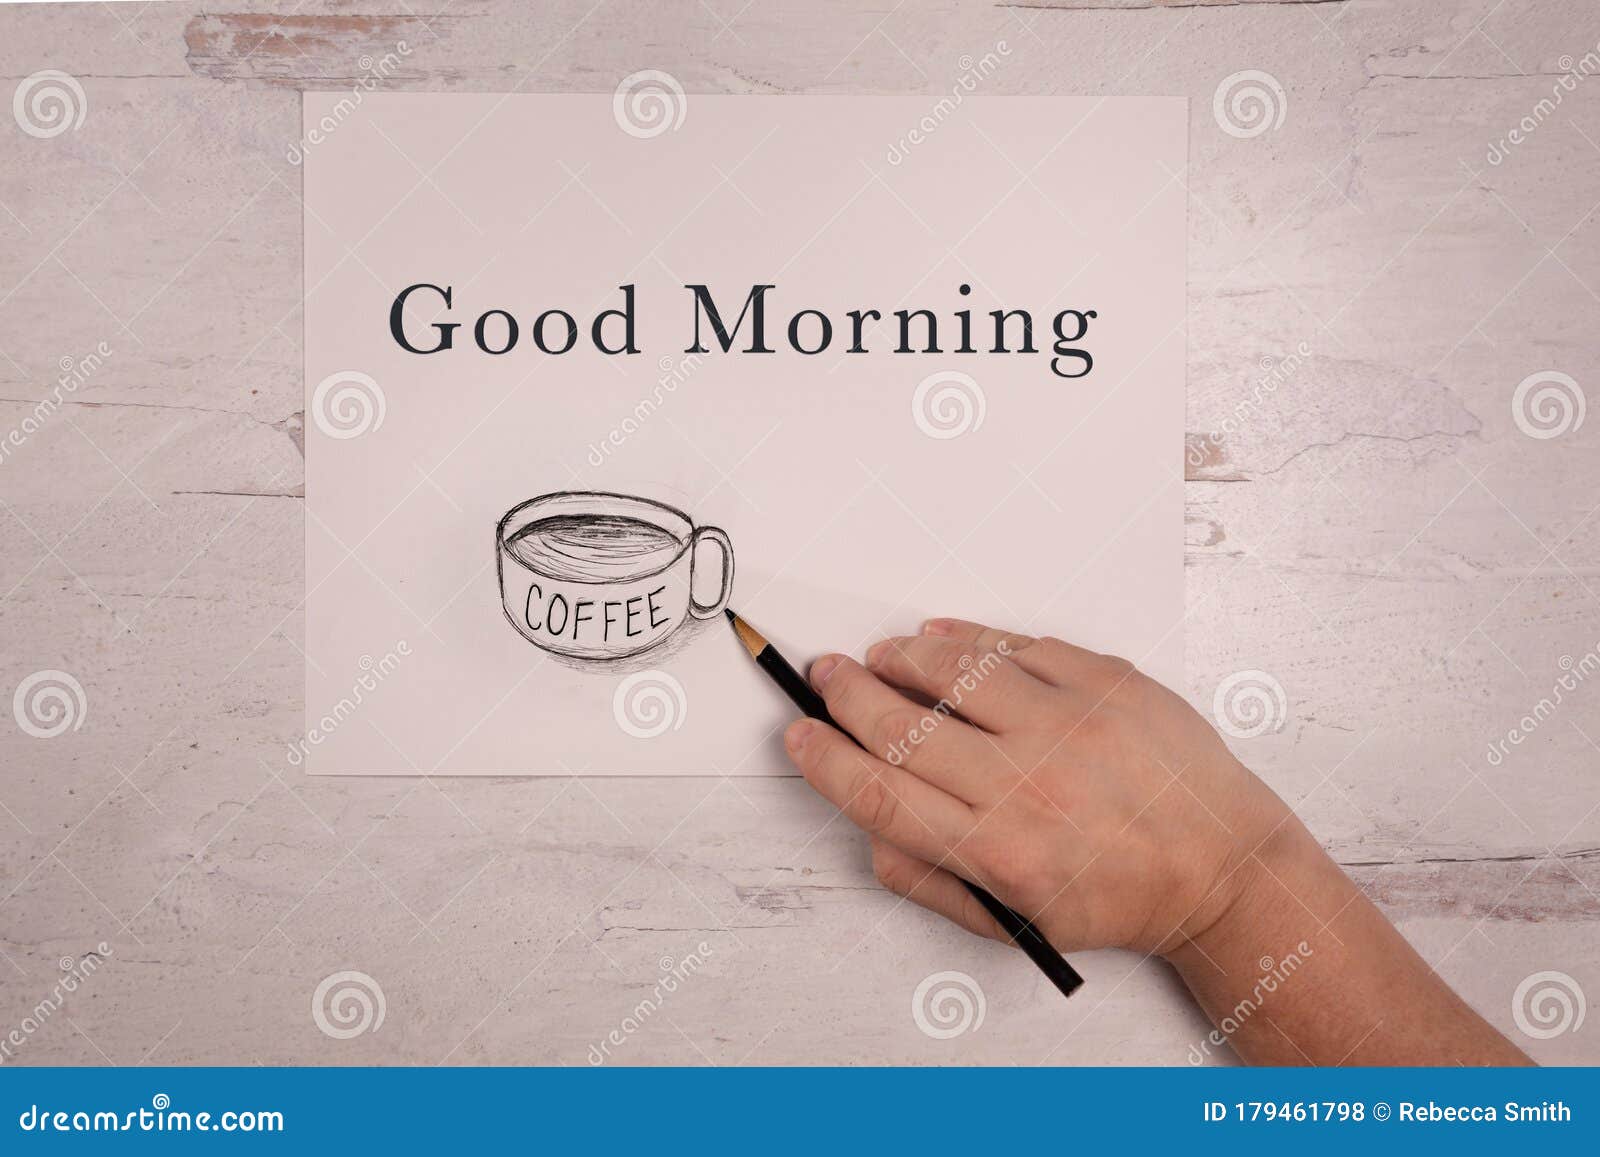 Good Morning Greeting with Hand Drawn Coffee Cup Real Hand Holding ...